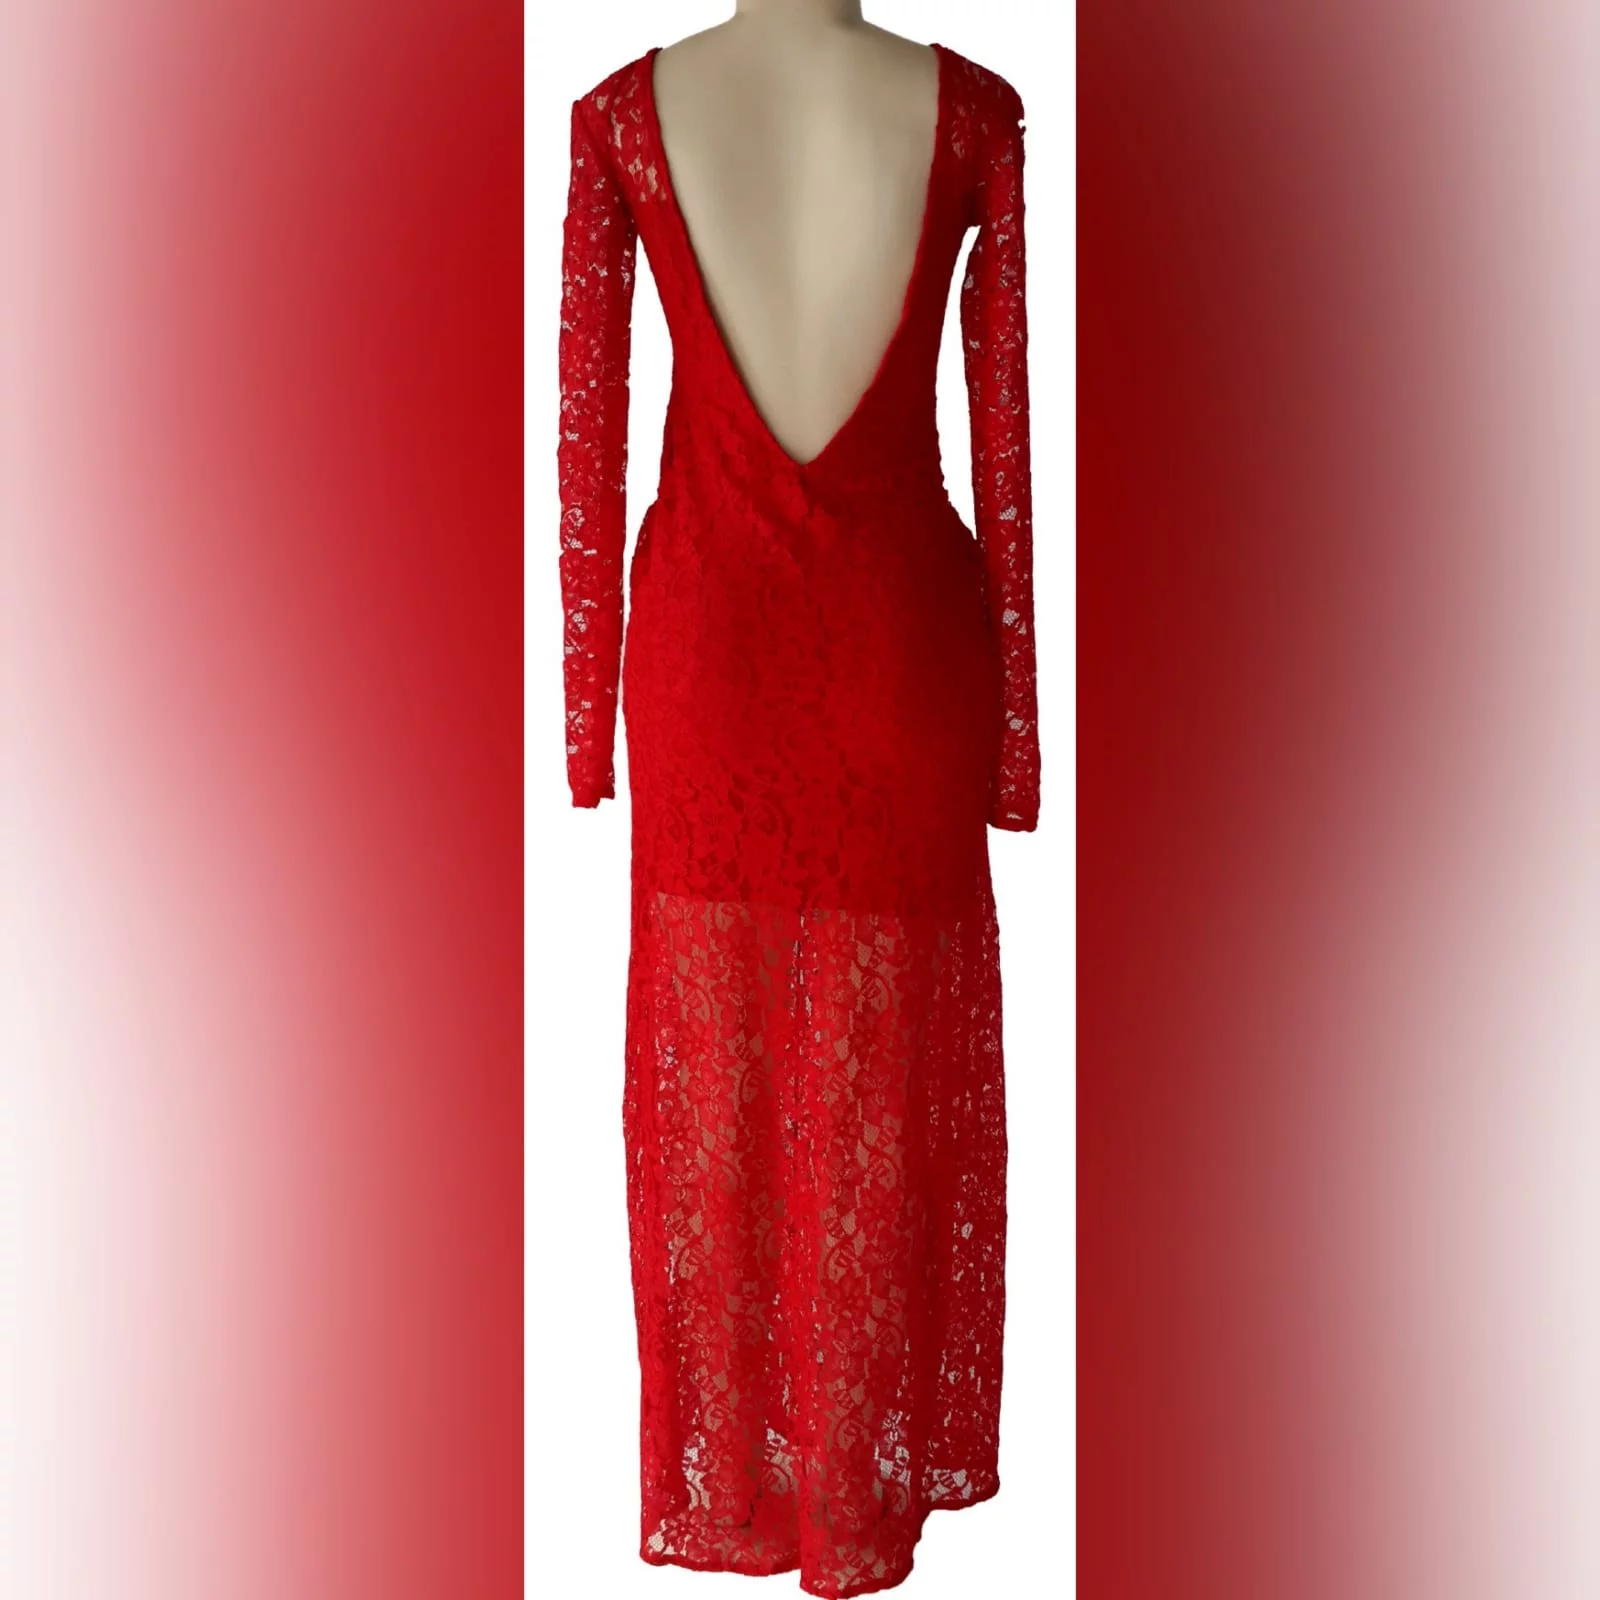 Long red lace evening dress 3 long red lace evening dress, with legs, neckline and sleeves sheer, with a v low back